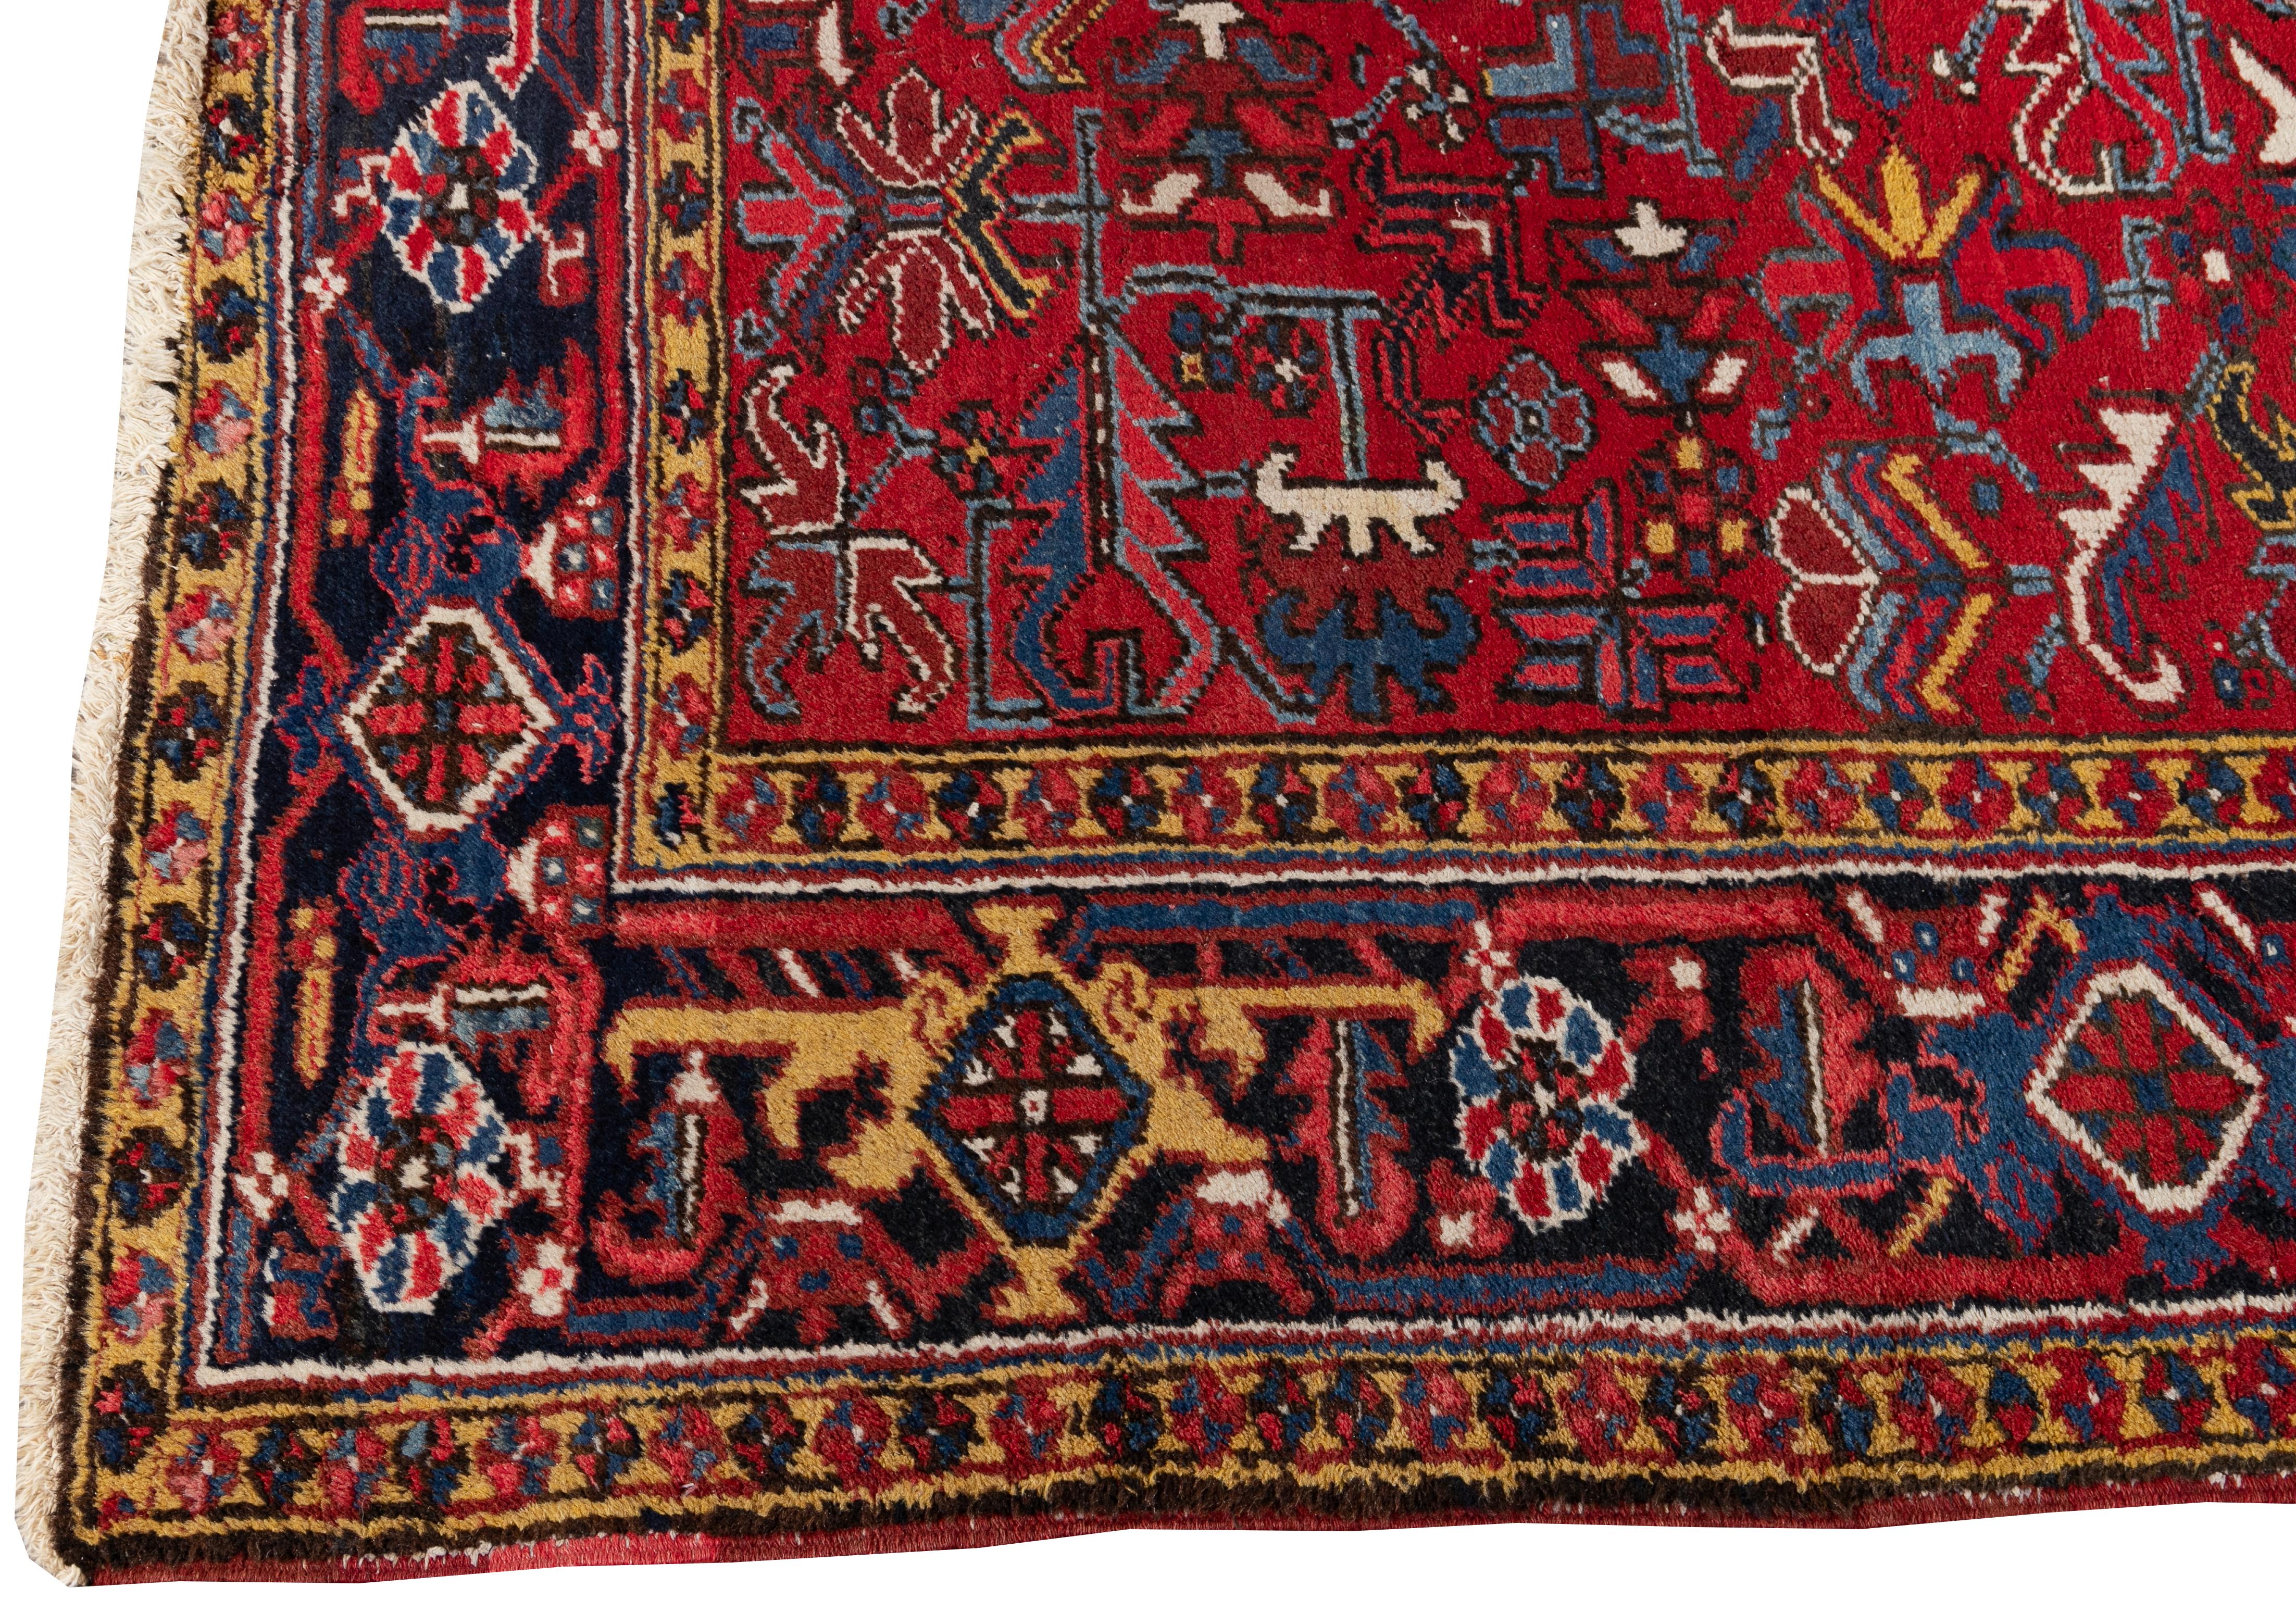 Early 20th Century Antique Persian Heriz Red Wool Rug In Good Condition For Sale In Norwalk, CT